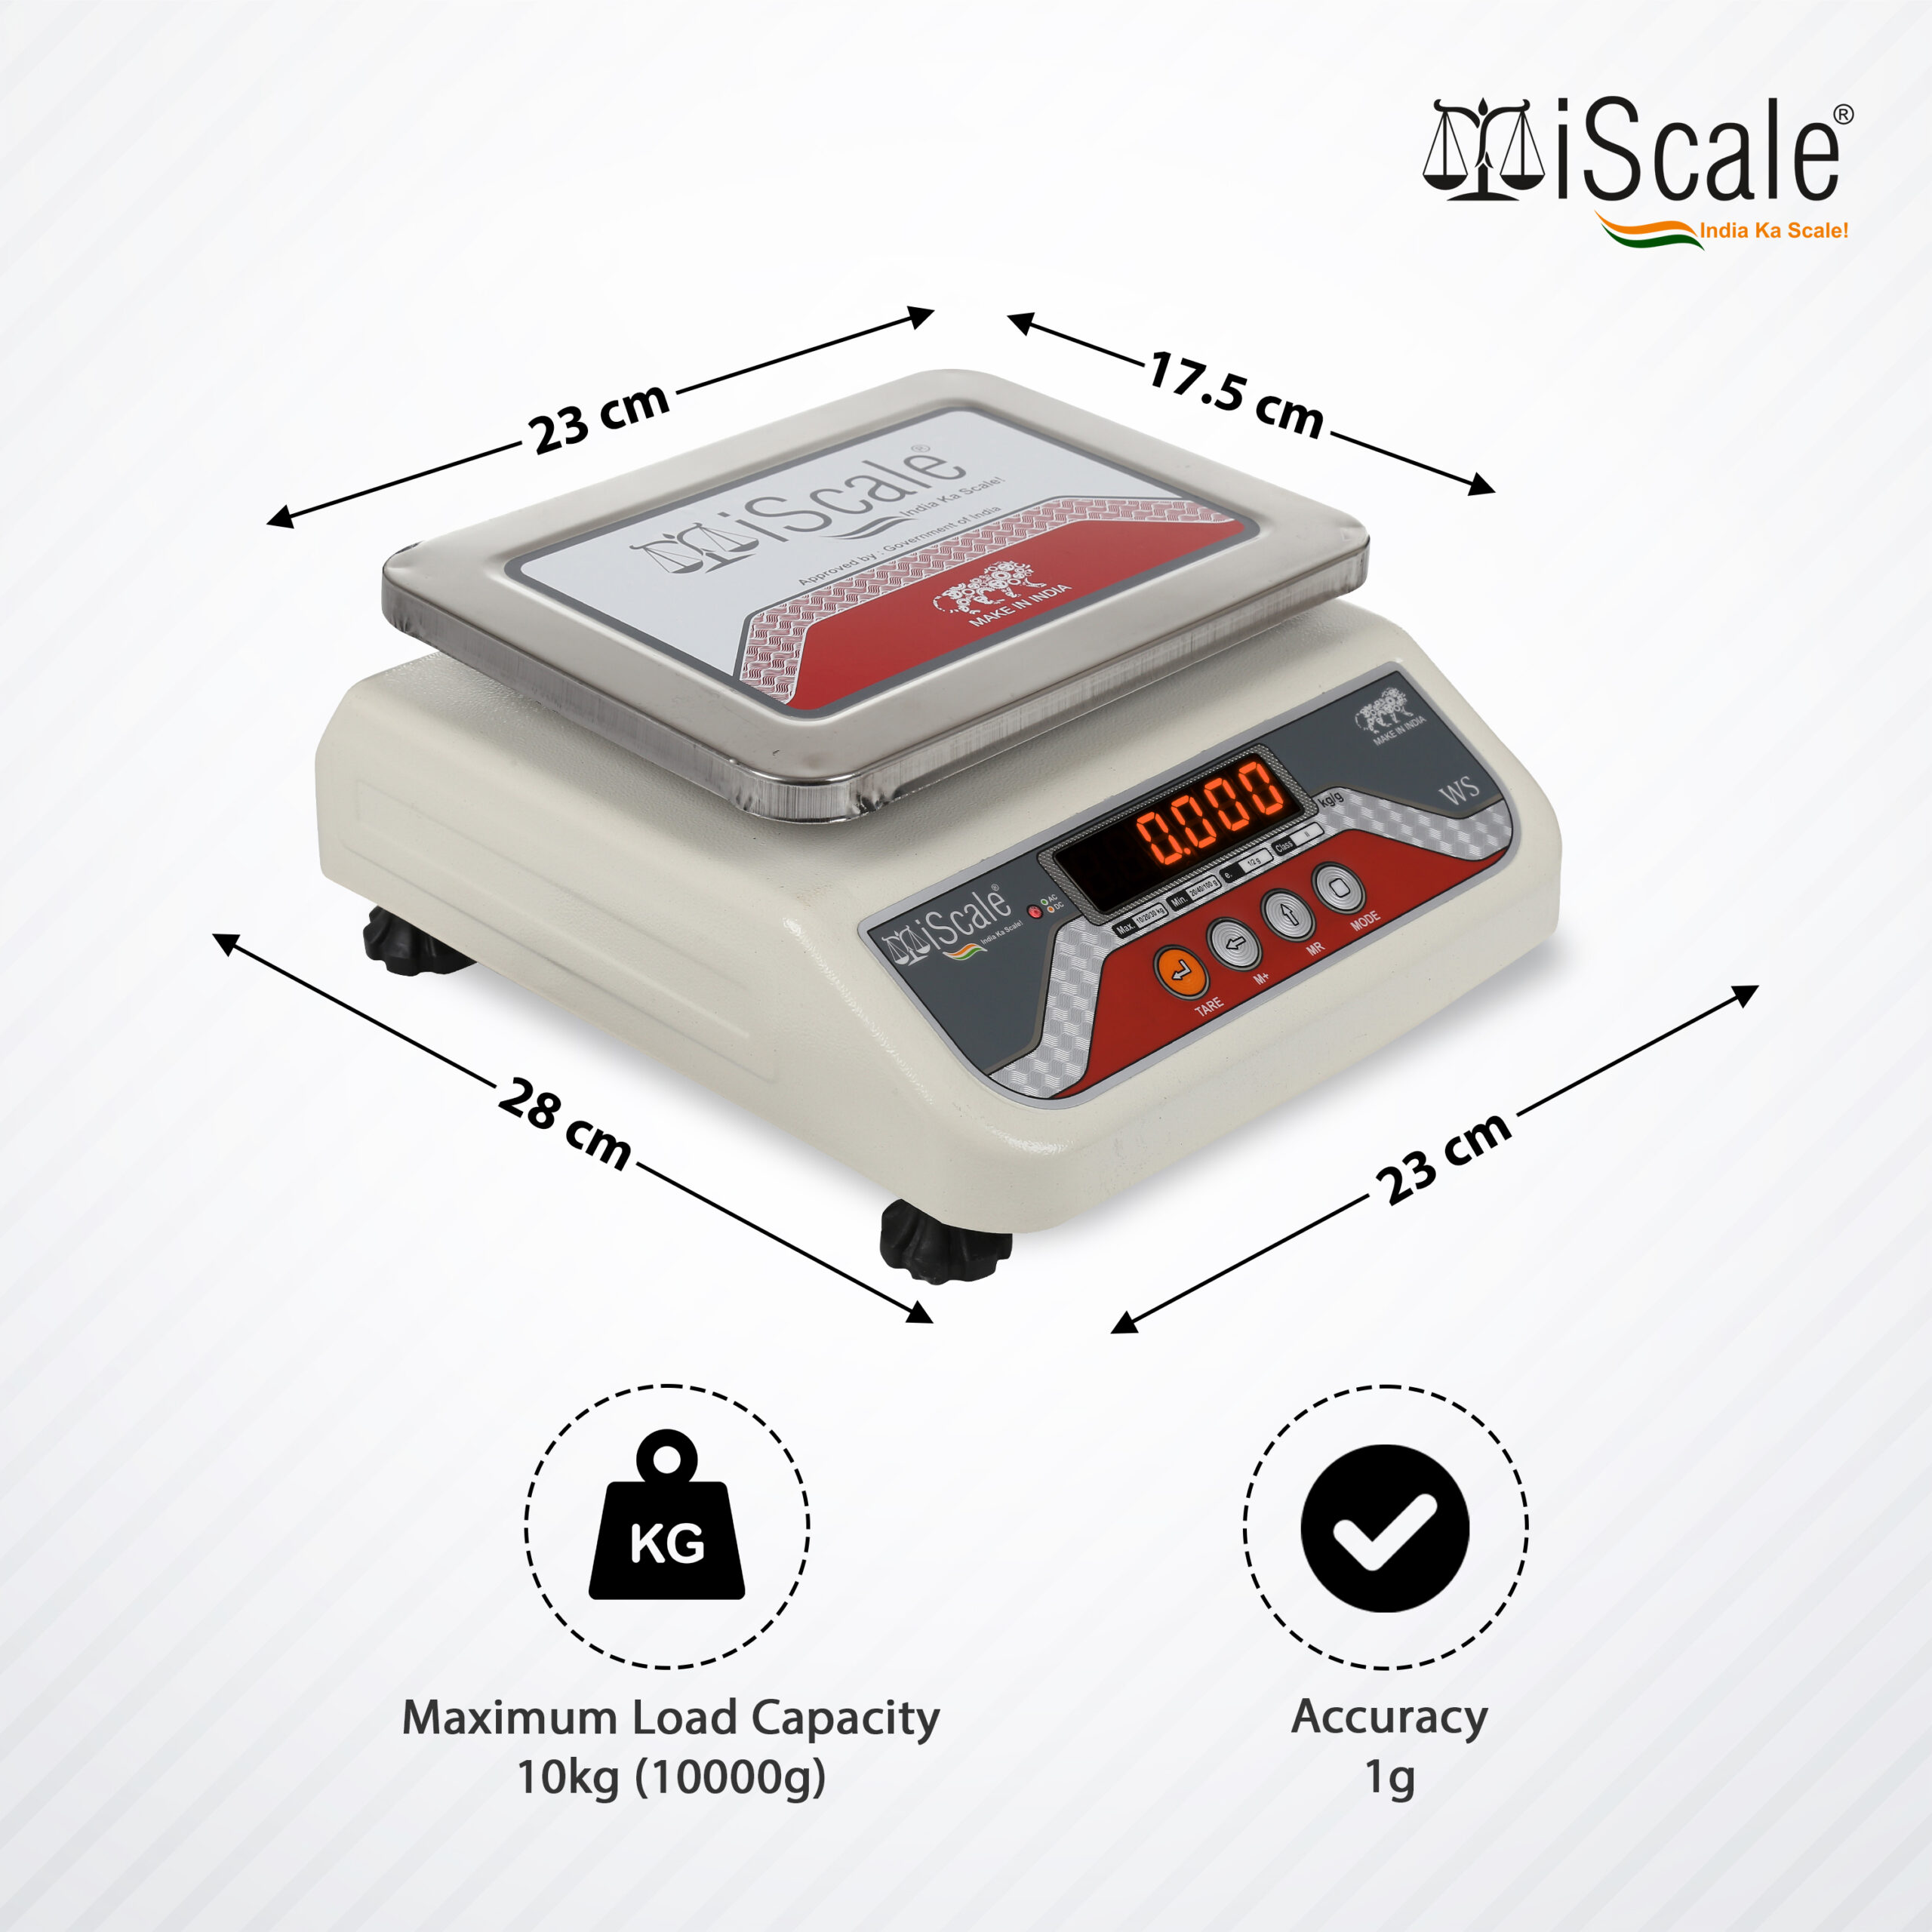 iScale i-03 Weight Capacity 10kg x 1g Digital Weighing Machine / Weighing Scale with Front and Back Double Display for Kirana Shop, Kitchen and Commercial Purposes